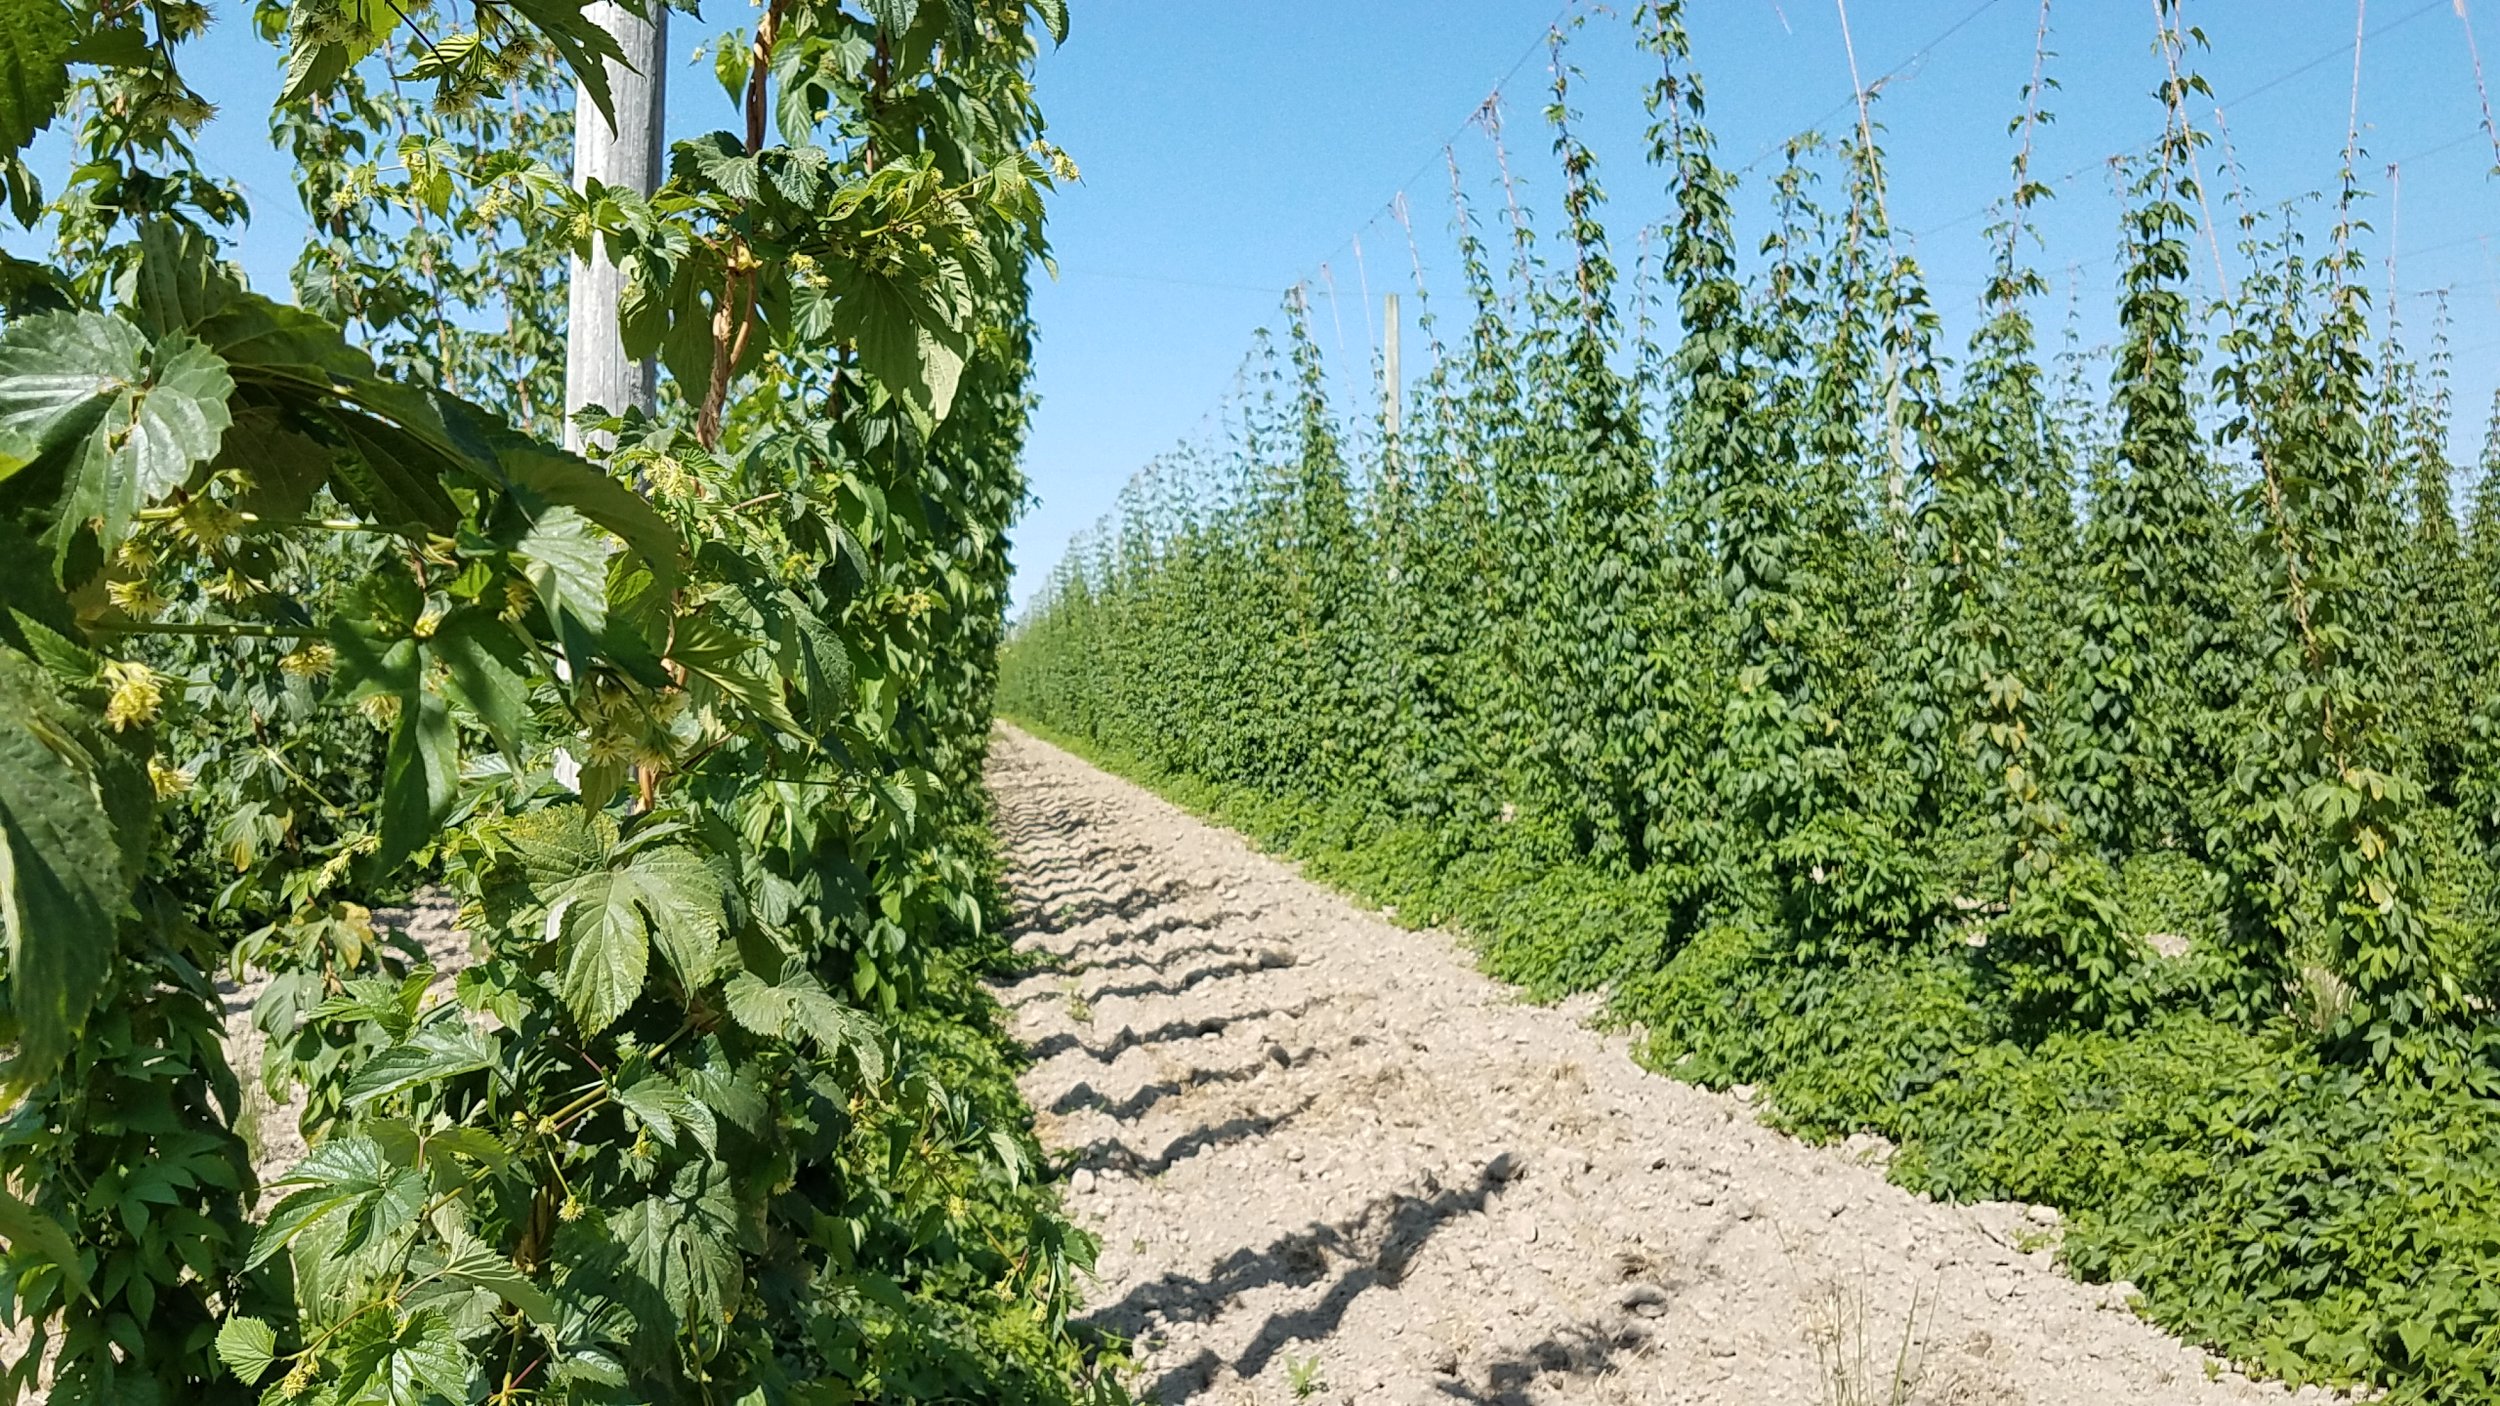 Meanwhile, The Hops, 7/18